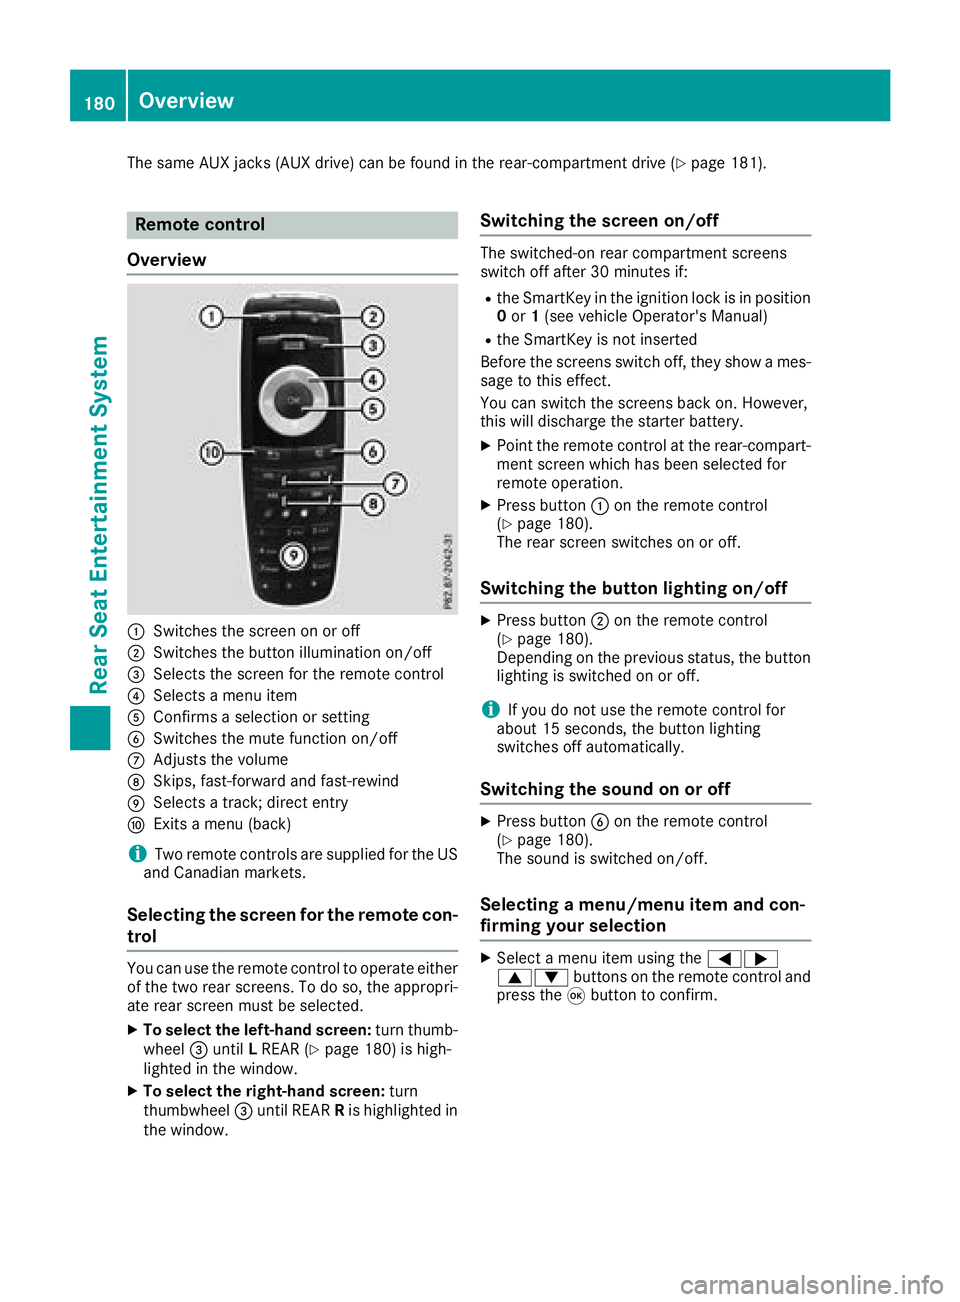 MERCEDES-BENZ G-CLASS 2018  COMAND Manual The same AUX jacks (AUX drive) can be found in the rear-compartment drive (Ypage 181).
Remote control
Overview
:Switches the screen on or off
;Switches the button illumination on/off
=Selects the scre